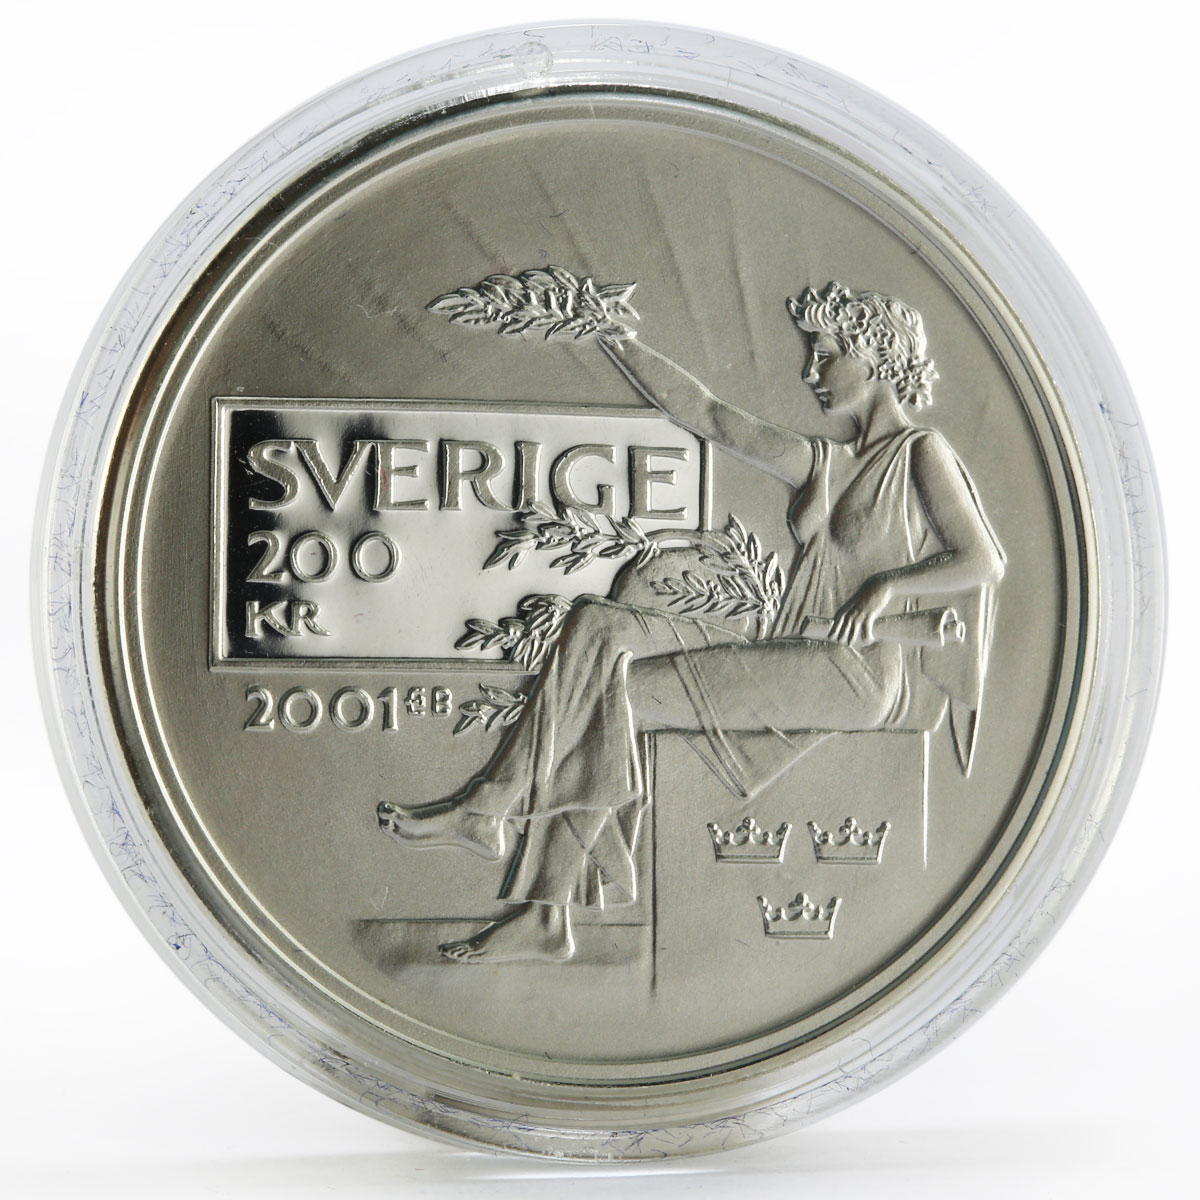 Sweden 200 kronor 100th Anniversary of the Nobel Prize proof silver coin 2001